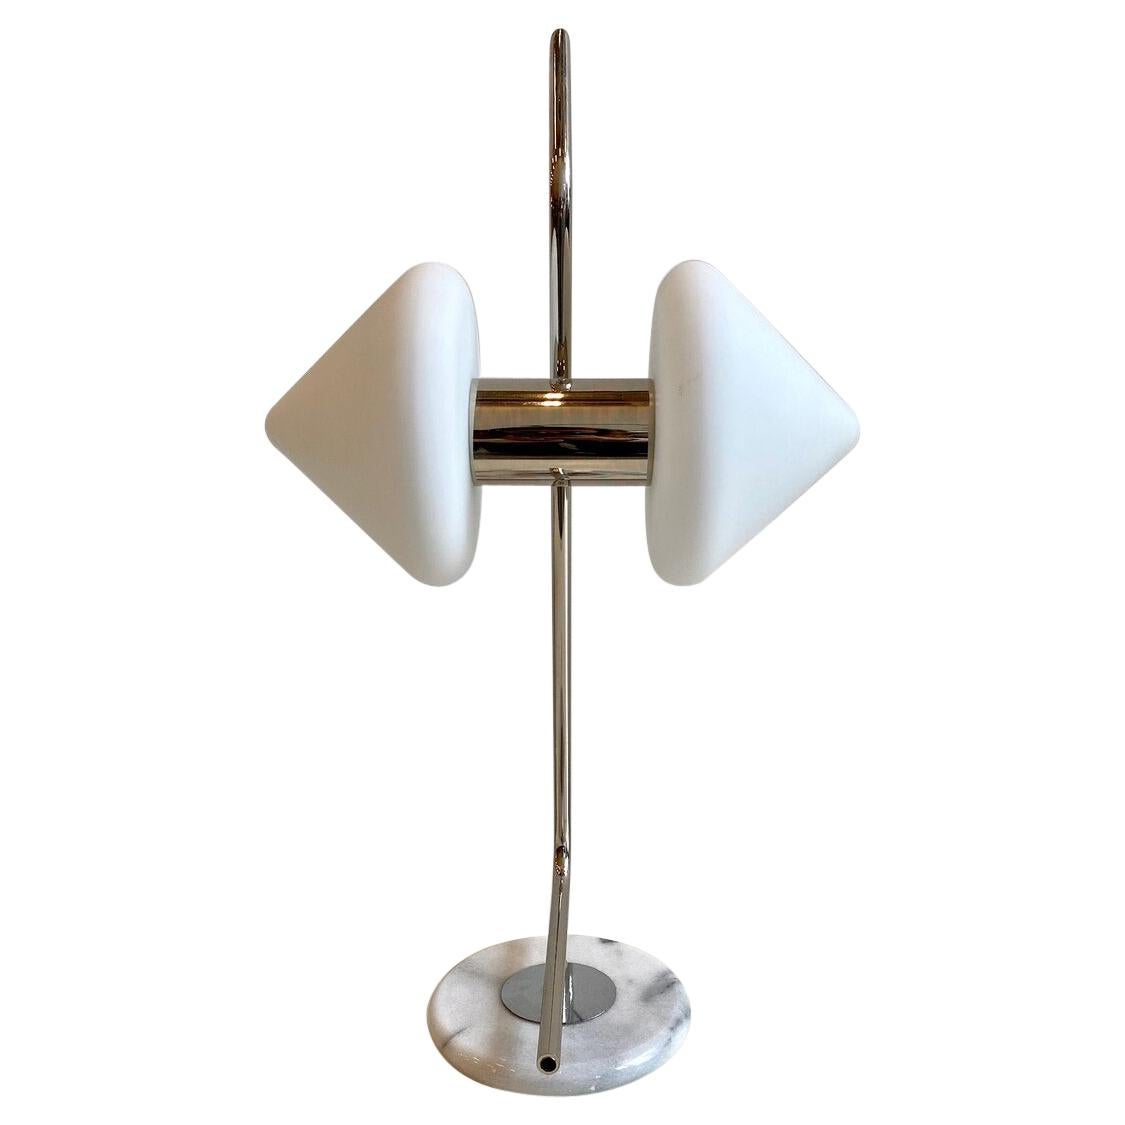 Double Cone Arlus Lunel Table Lamp in Metal with Marble Base